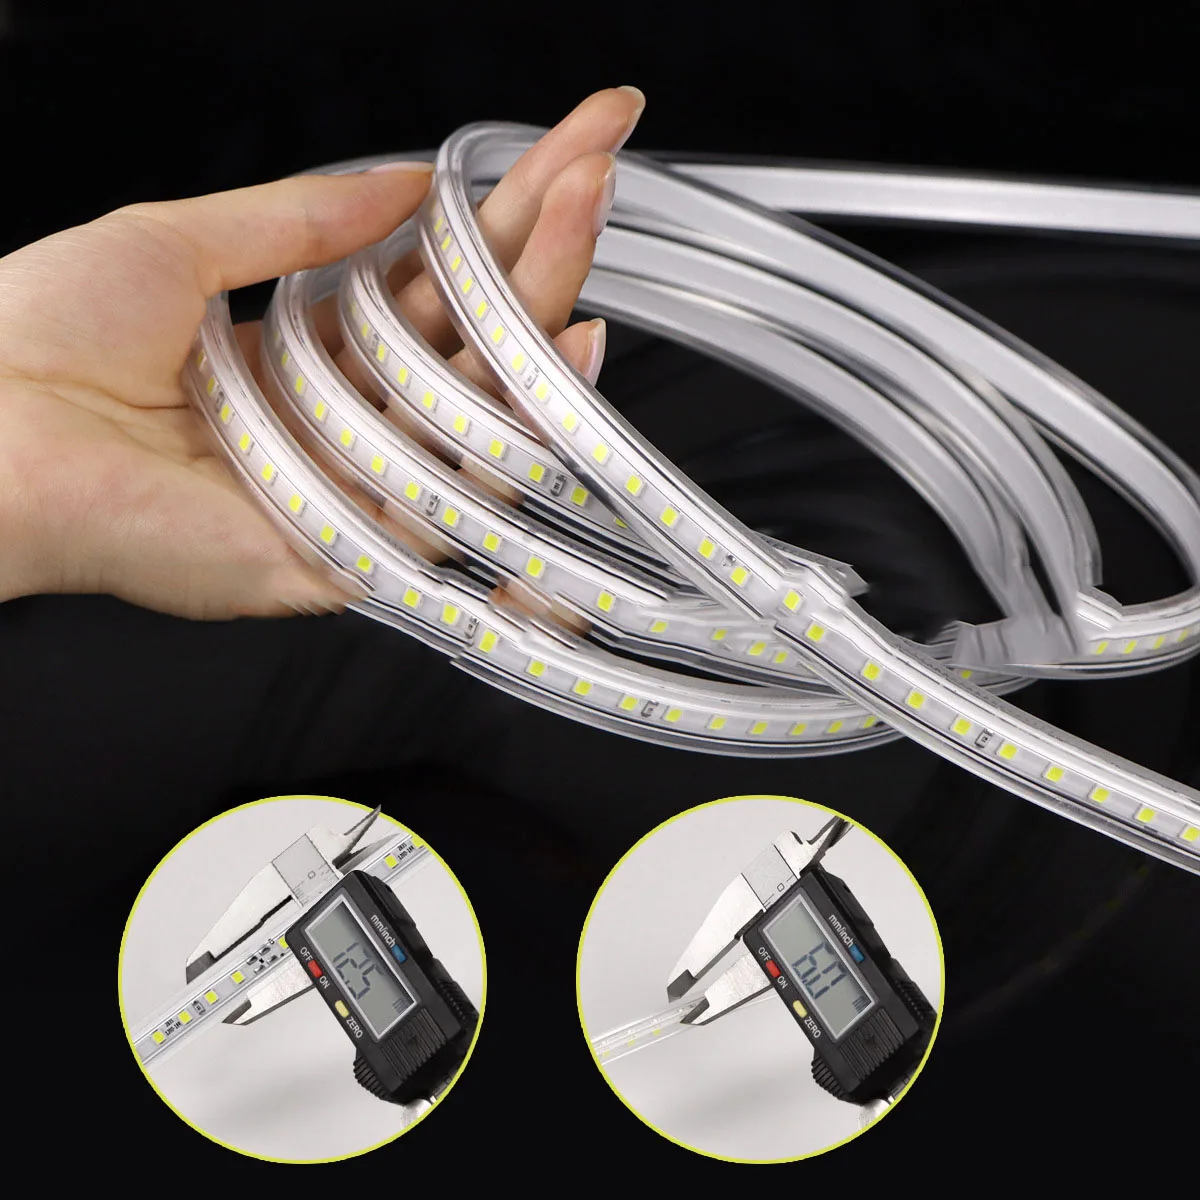 AC 110V 220V LED Flexible Silicone Strip Lights 2835SMD 120LED/M Indoor Ceiling Outdoor Strip Lamps With EU/US Power Plug